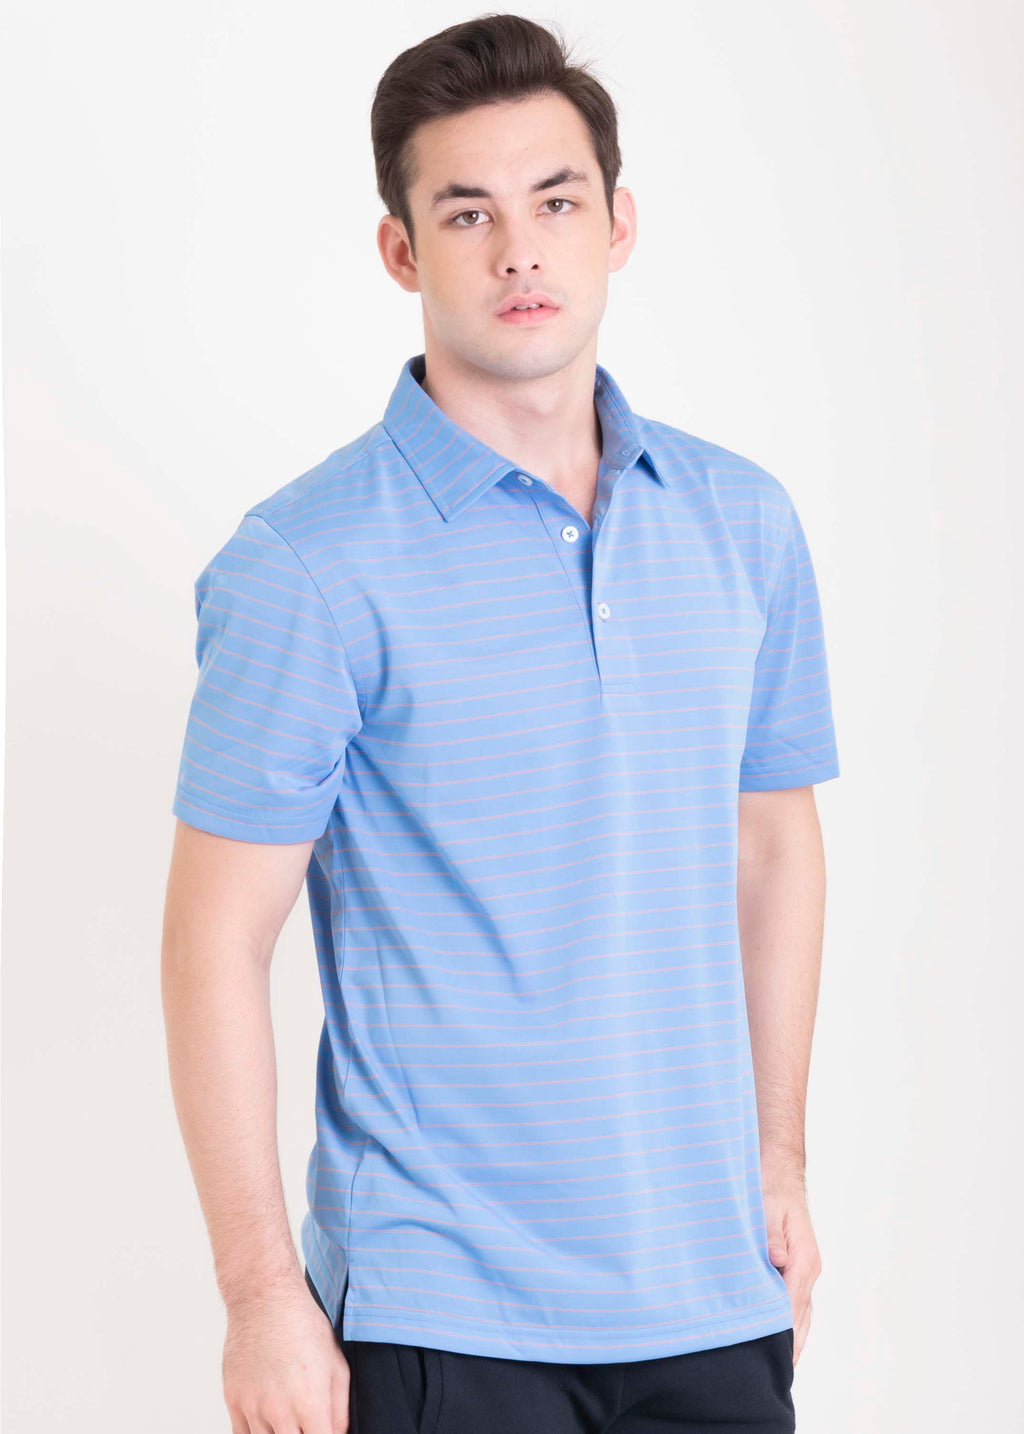 Ramé Dryfit Polo Shirt in Blue and Orange Stripes